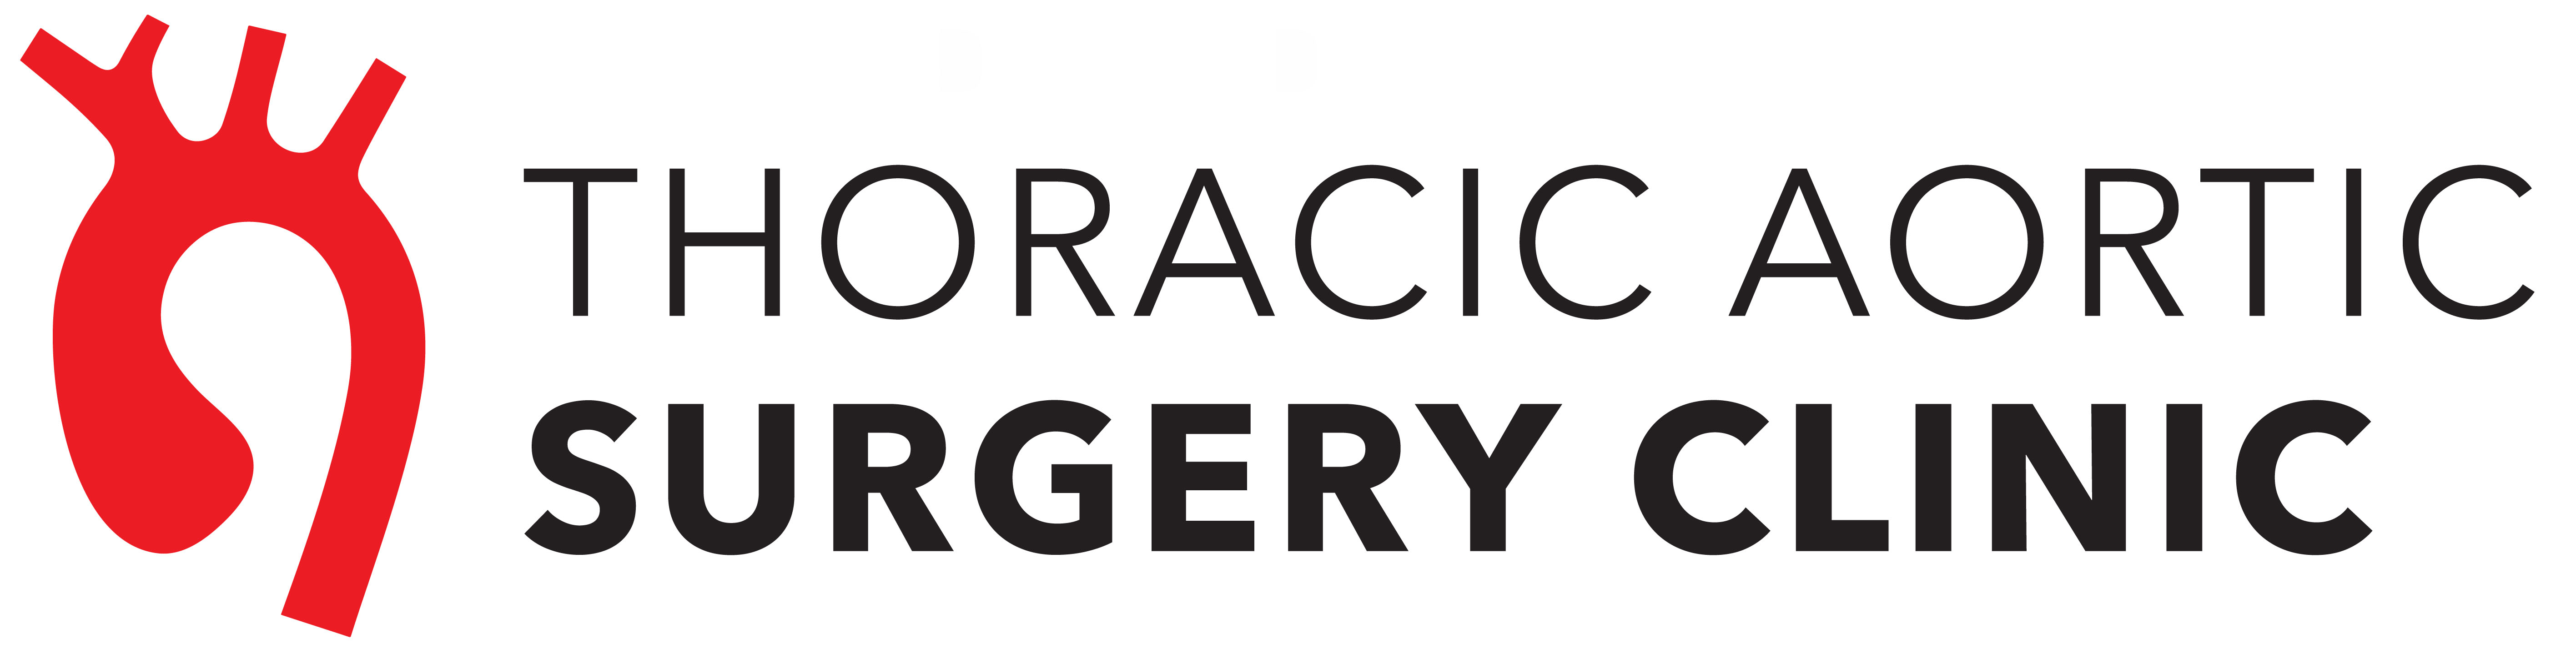 Thoracic Aortic Surgery Clinic logo